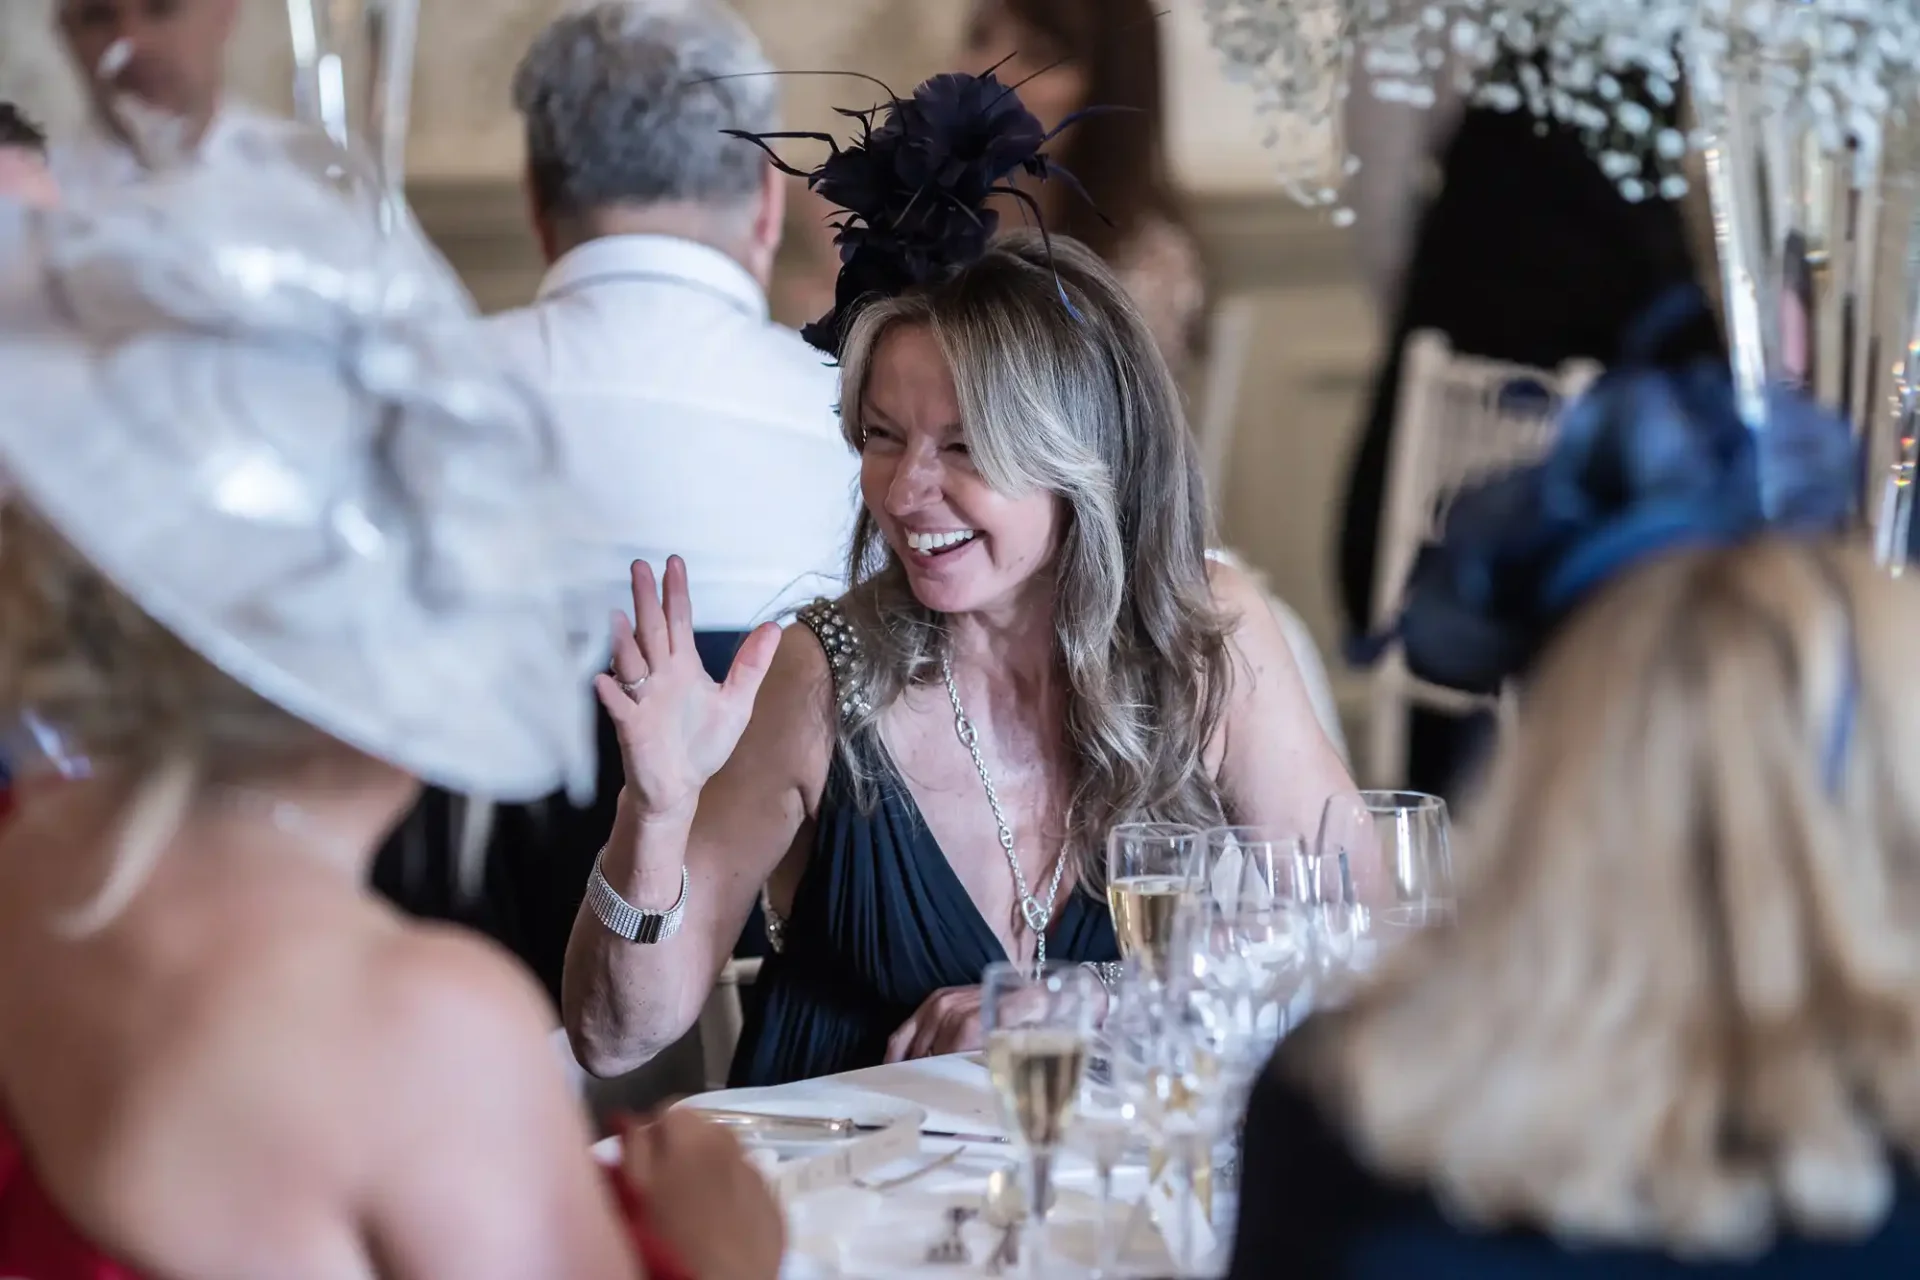 A woman, wearing a floral dress and a black fascinator, laughs and waves at someone across a table during a formal event with other guests in hats.